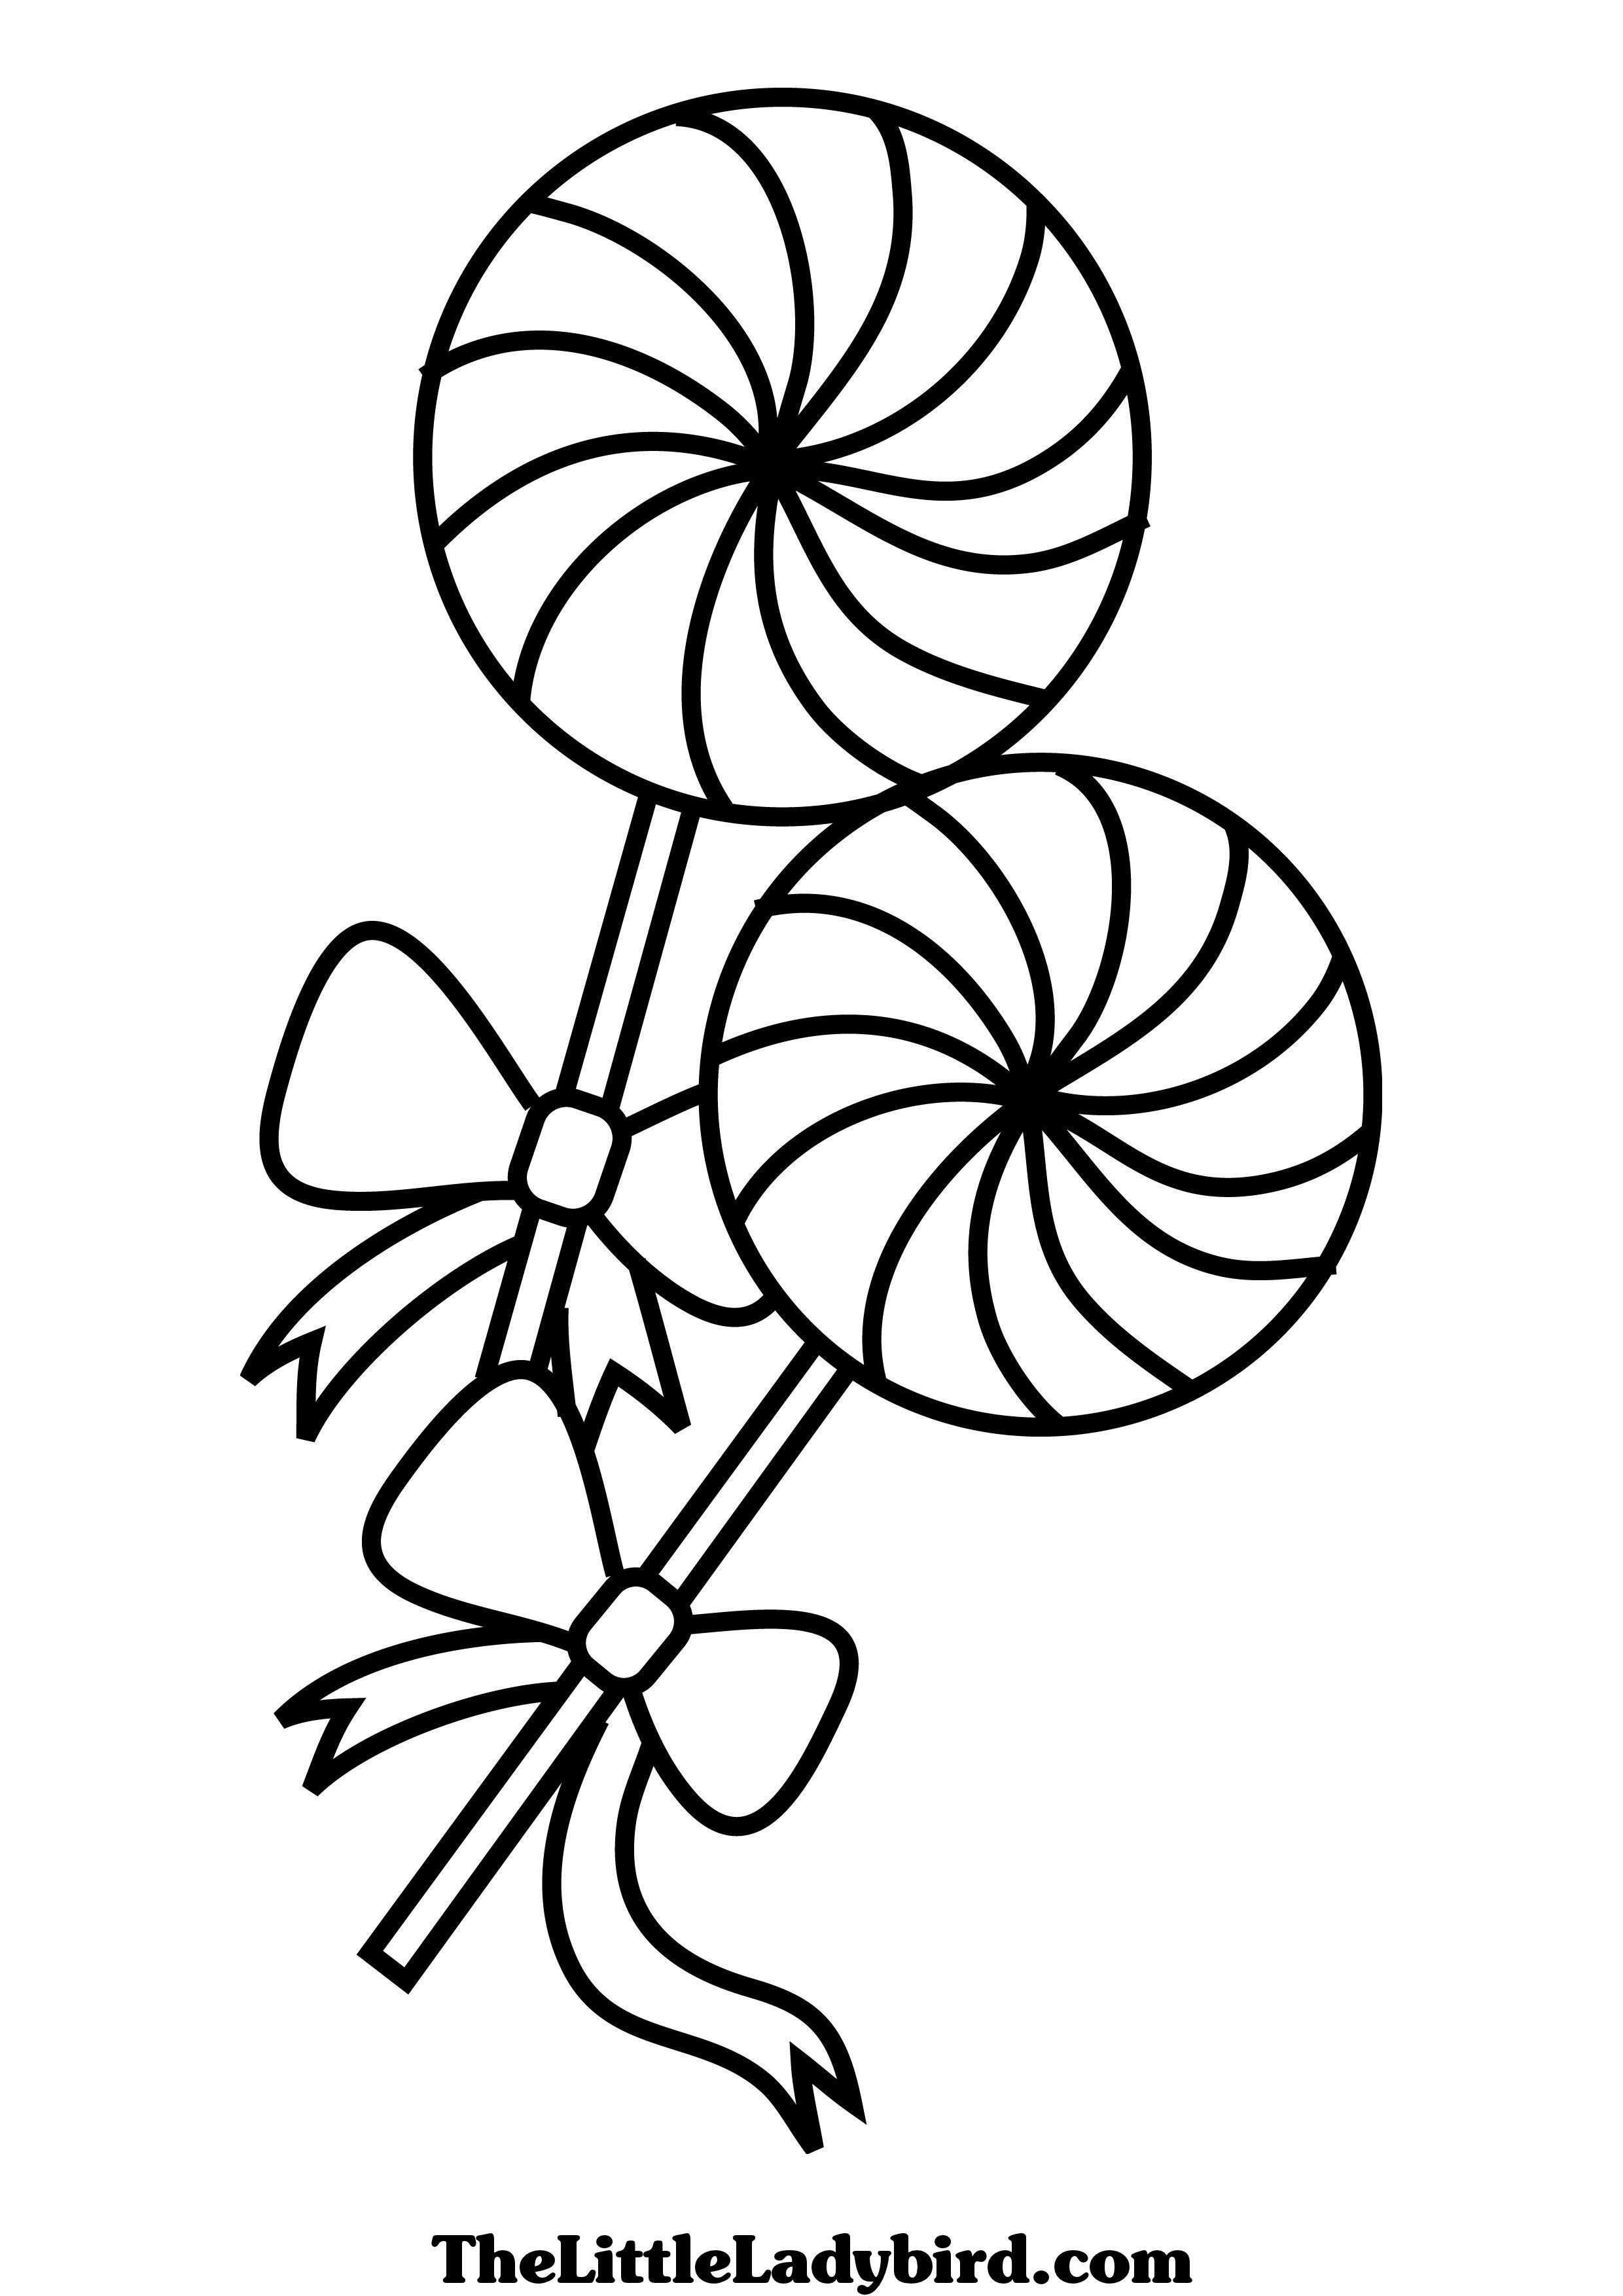 Sucker Coloring Page at GetColorings.com | Free printable colorings